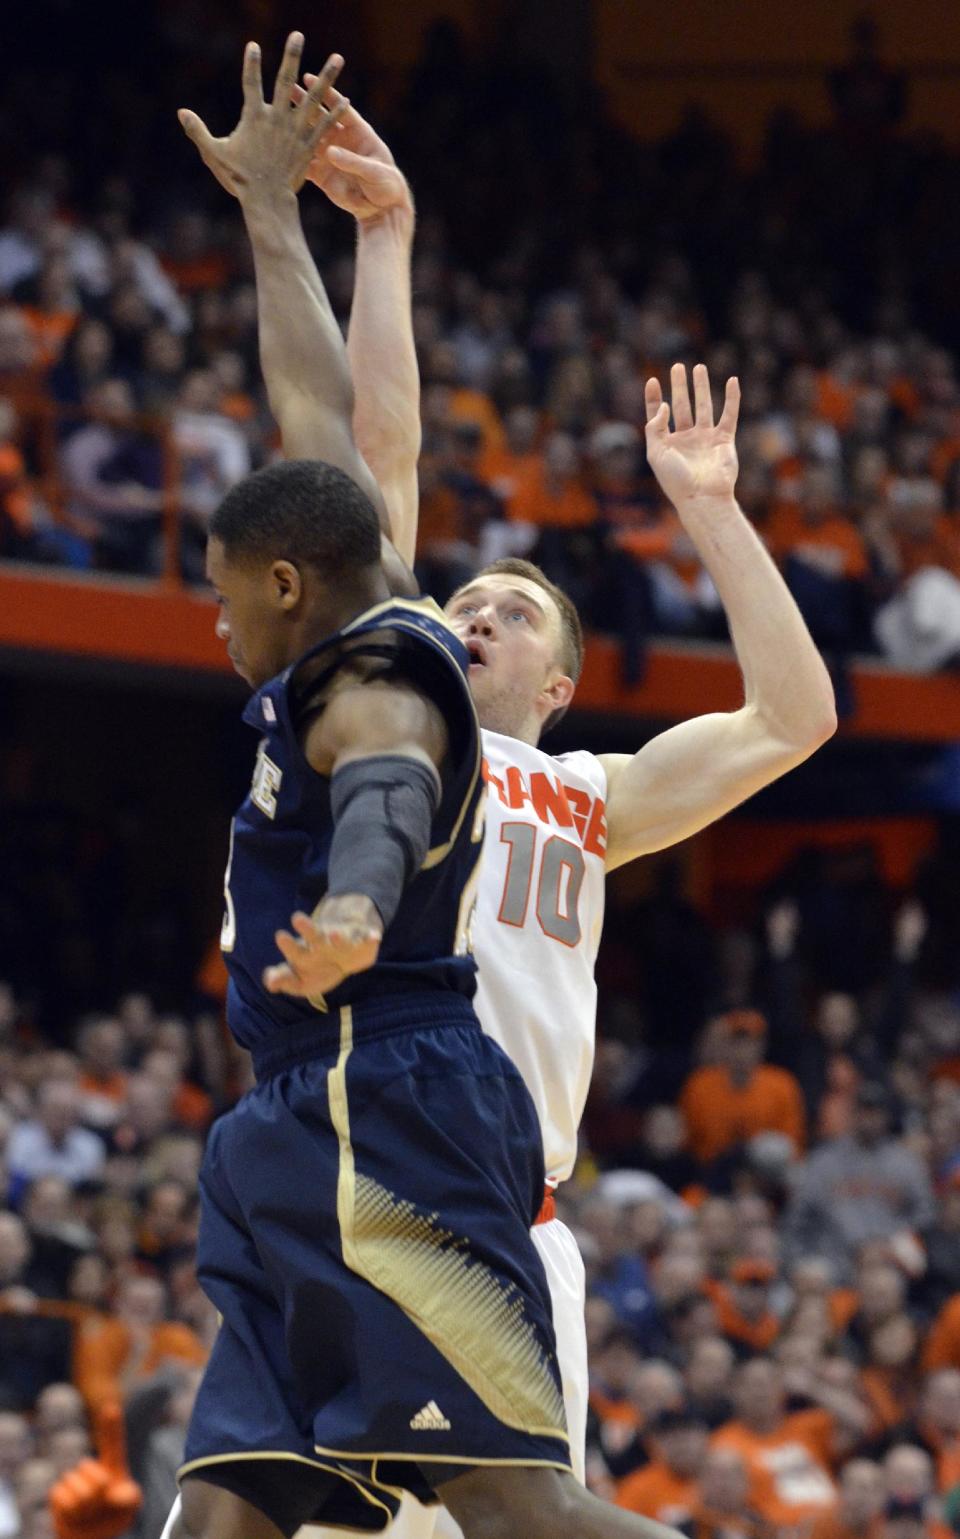 Syracuse's Trevor Cooney hits a three-point shot over Notre Dame's Demetrius Jackson during the second half of an NCAA college basketball game in Syracuse, N.Y., Monday, Feb. 3, 2014. Syracuse won 61-55. (AP Photo/Kevin Rivoli)